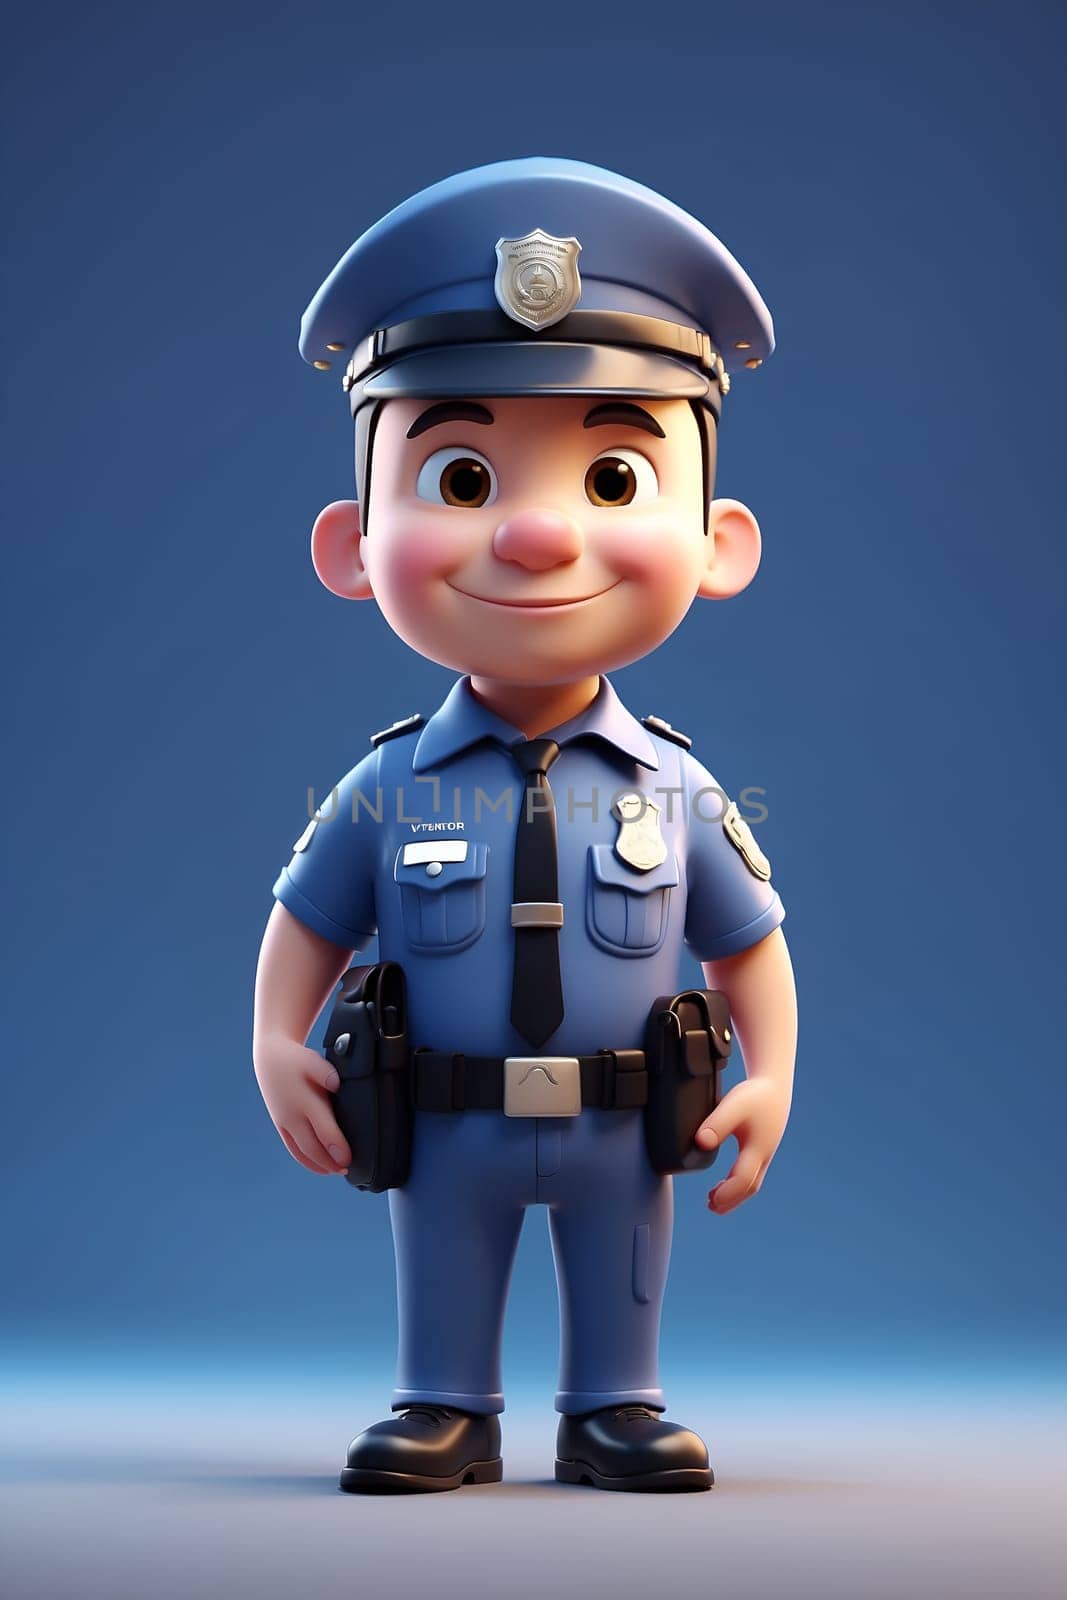 Cartoon Character in Police Uniform, Fun, Humorous Image of a Law Enforcement Character. Generative AI. by artofphoto